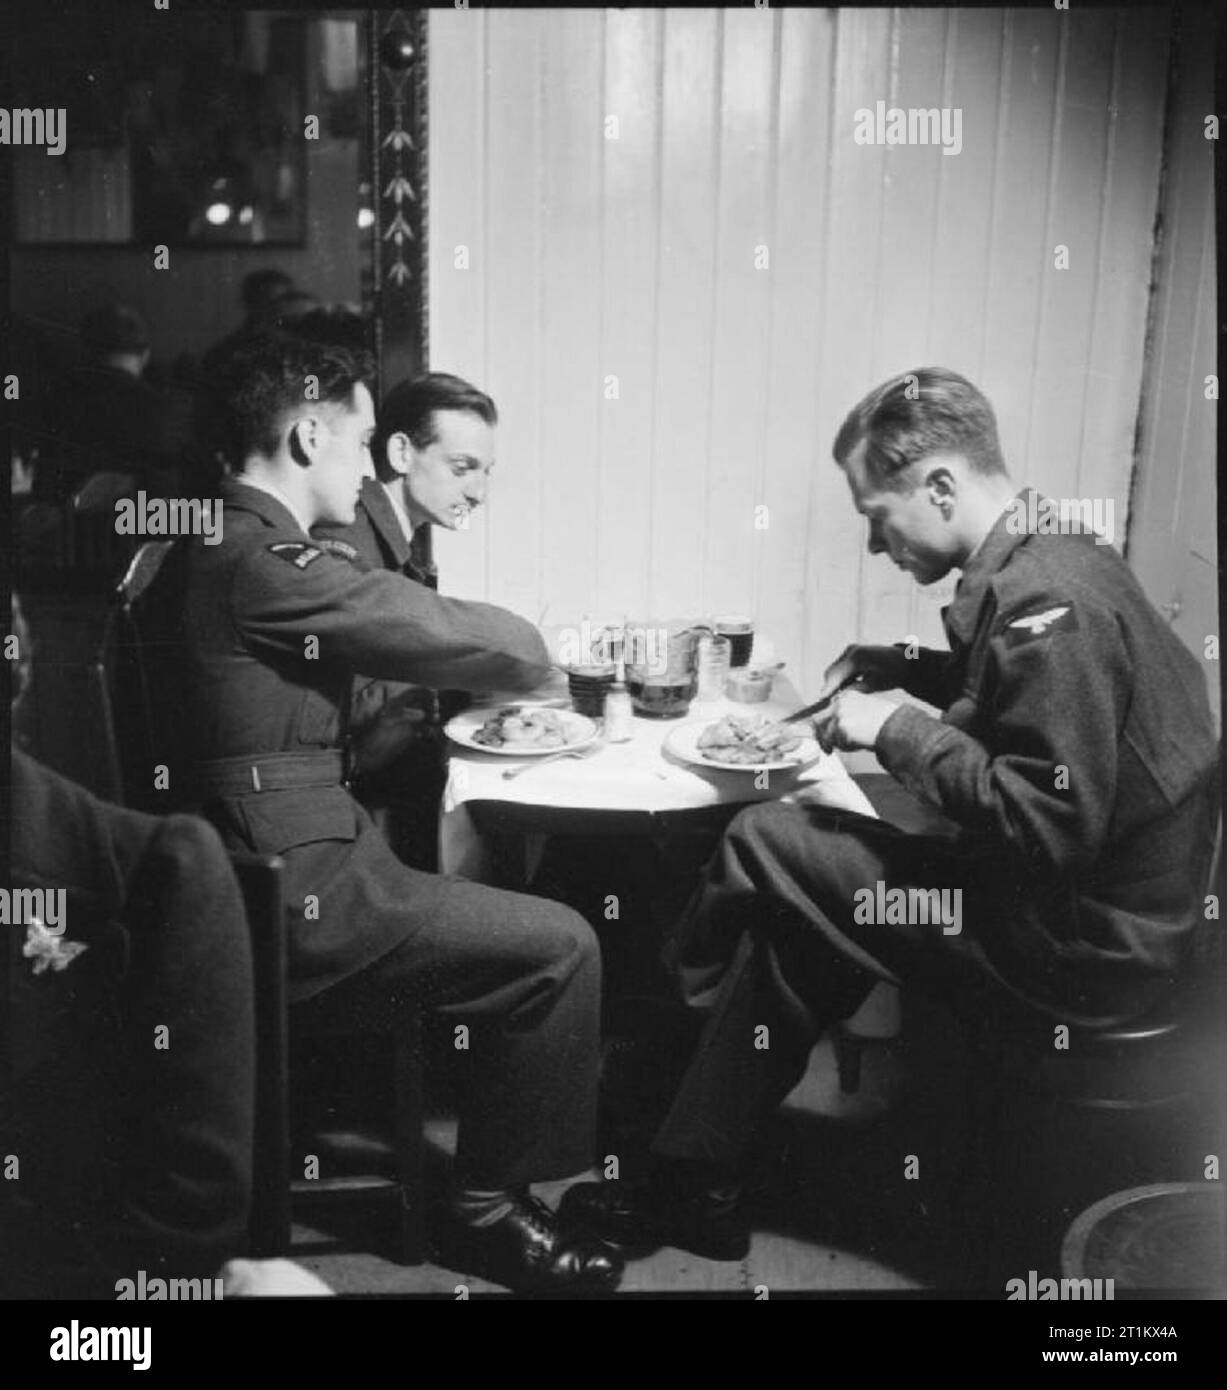 Belgian Clubs and Cafes in London- Rest, Relaxation and Entertainment, London, England, UK, 1945 Three Belgian airmen enjoy a meal at a London restaurant called 'Chez Rose'. Stock Photo